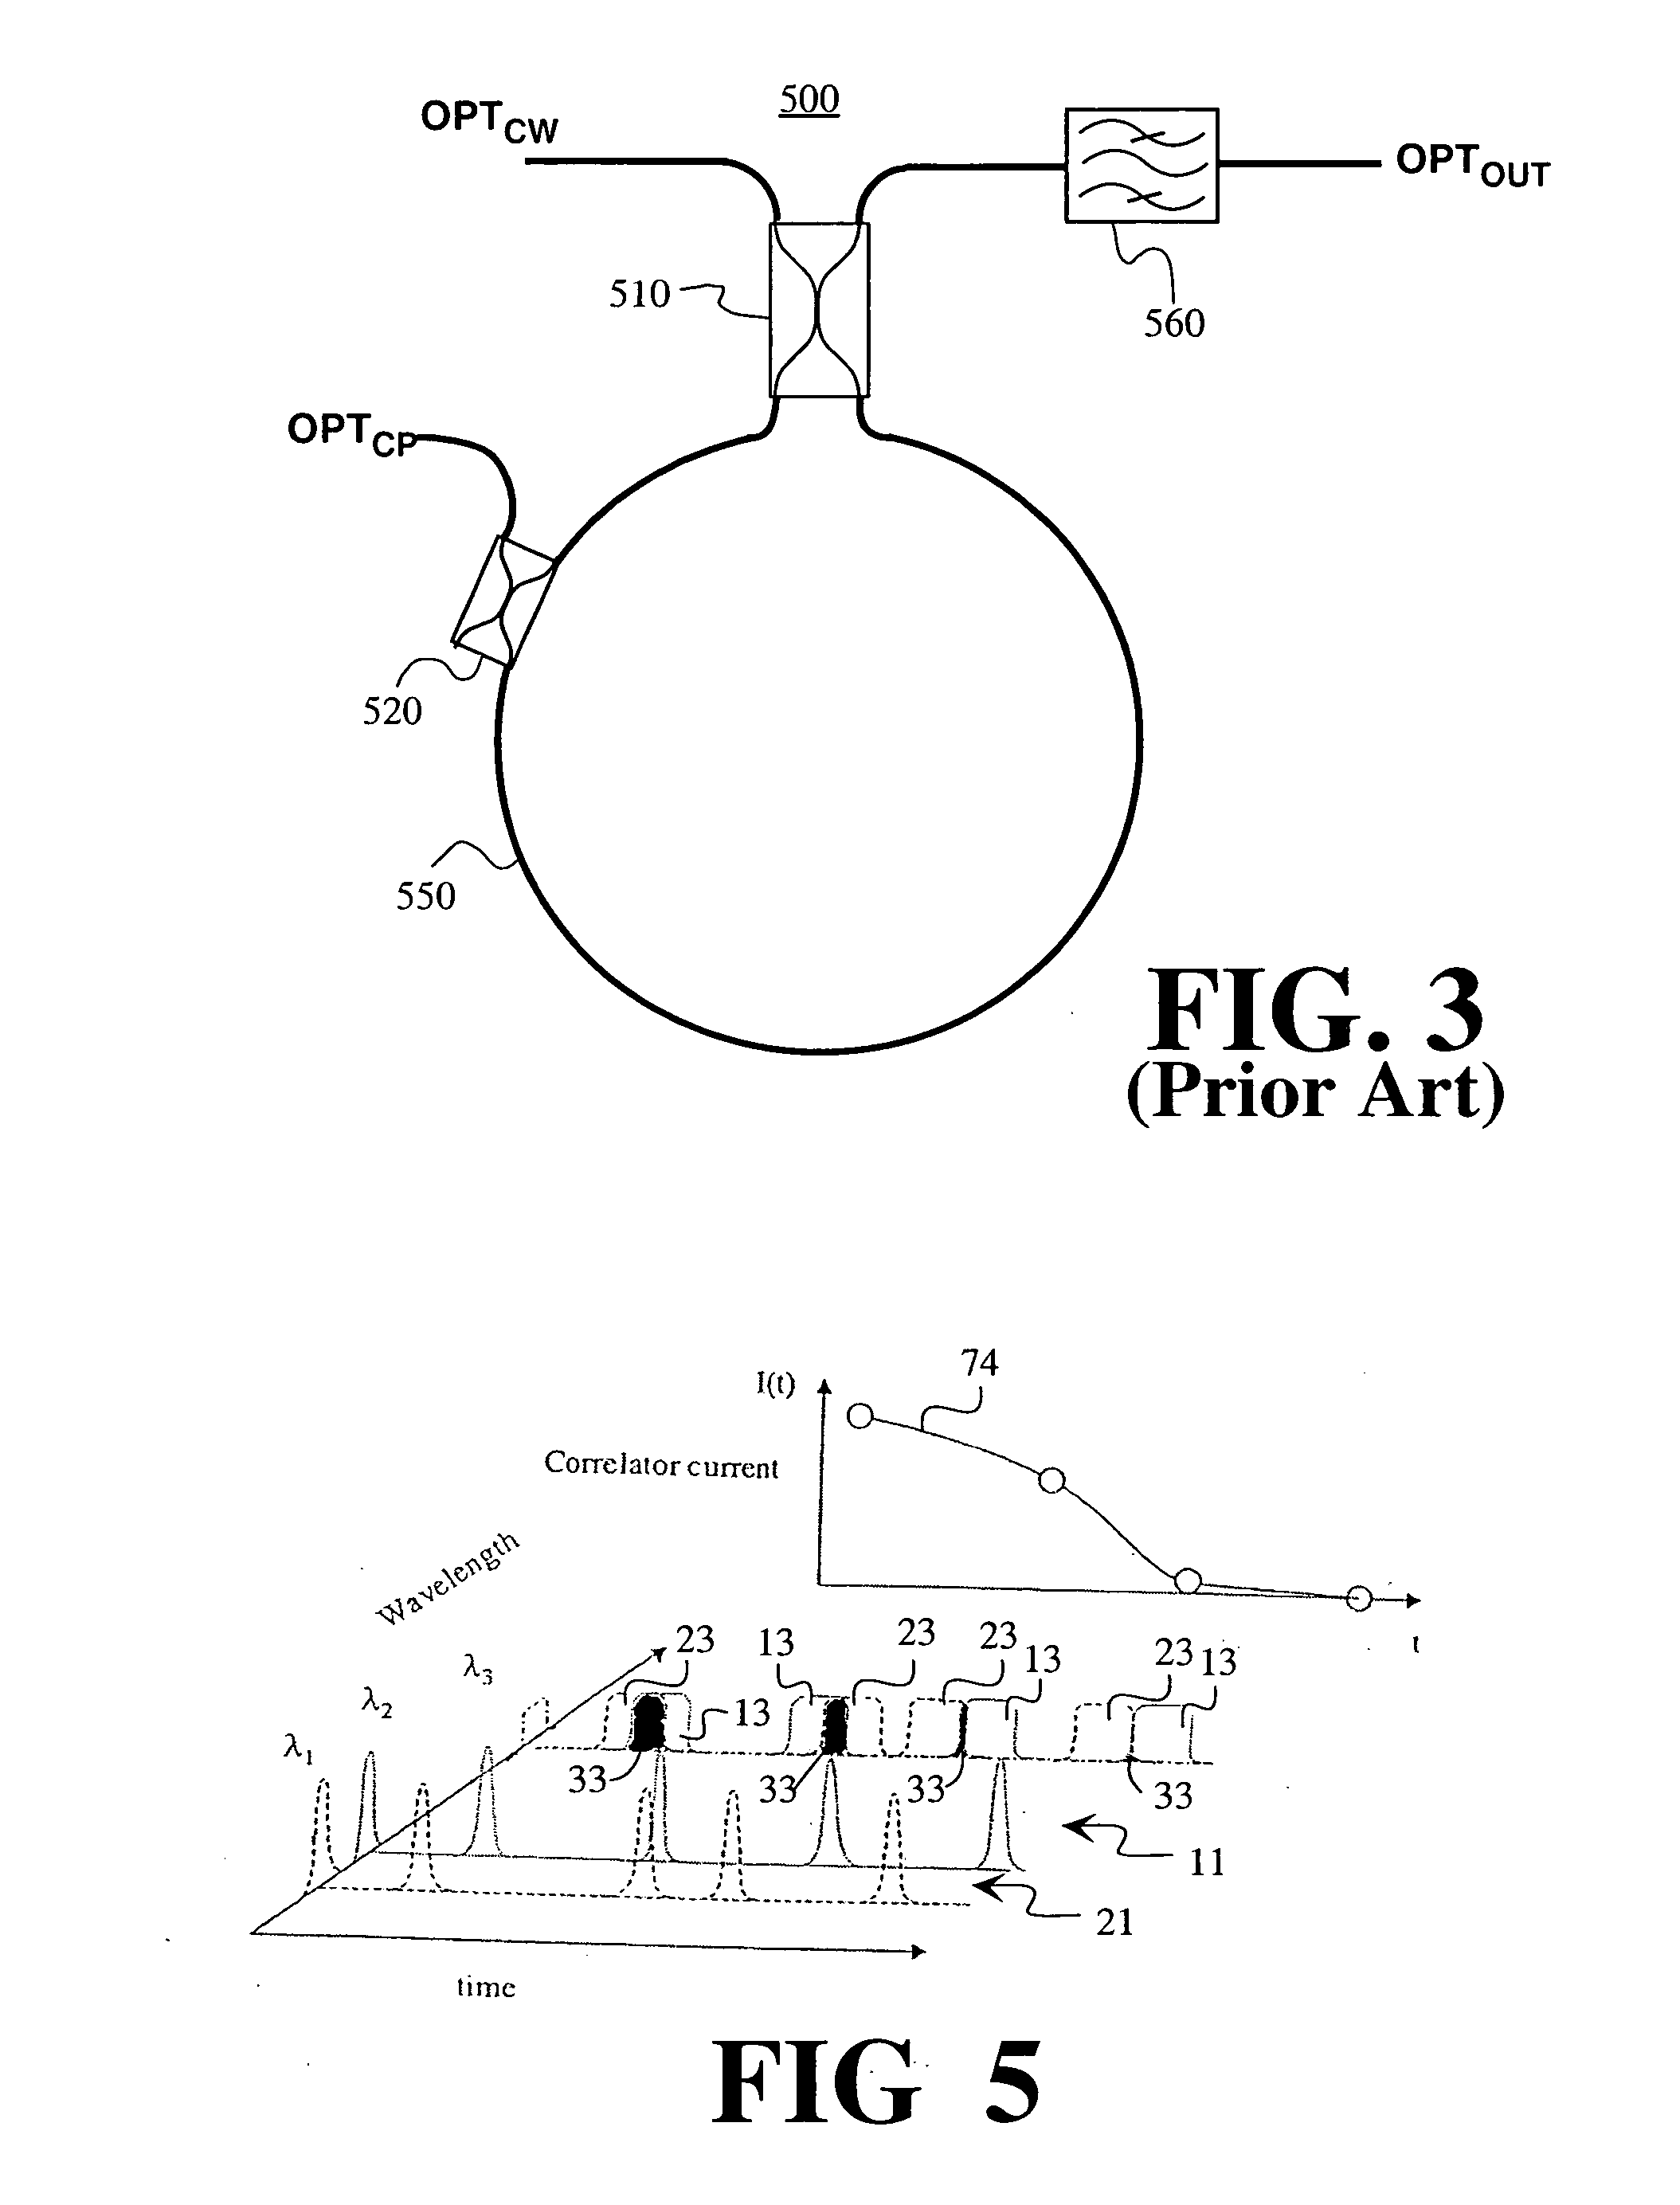 Method and apparatus for optical top-hat pulse generation